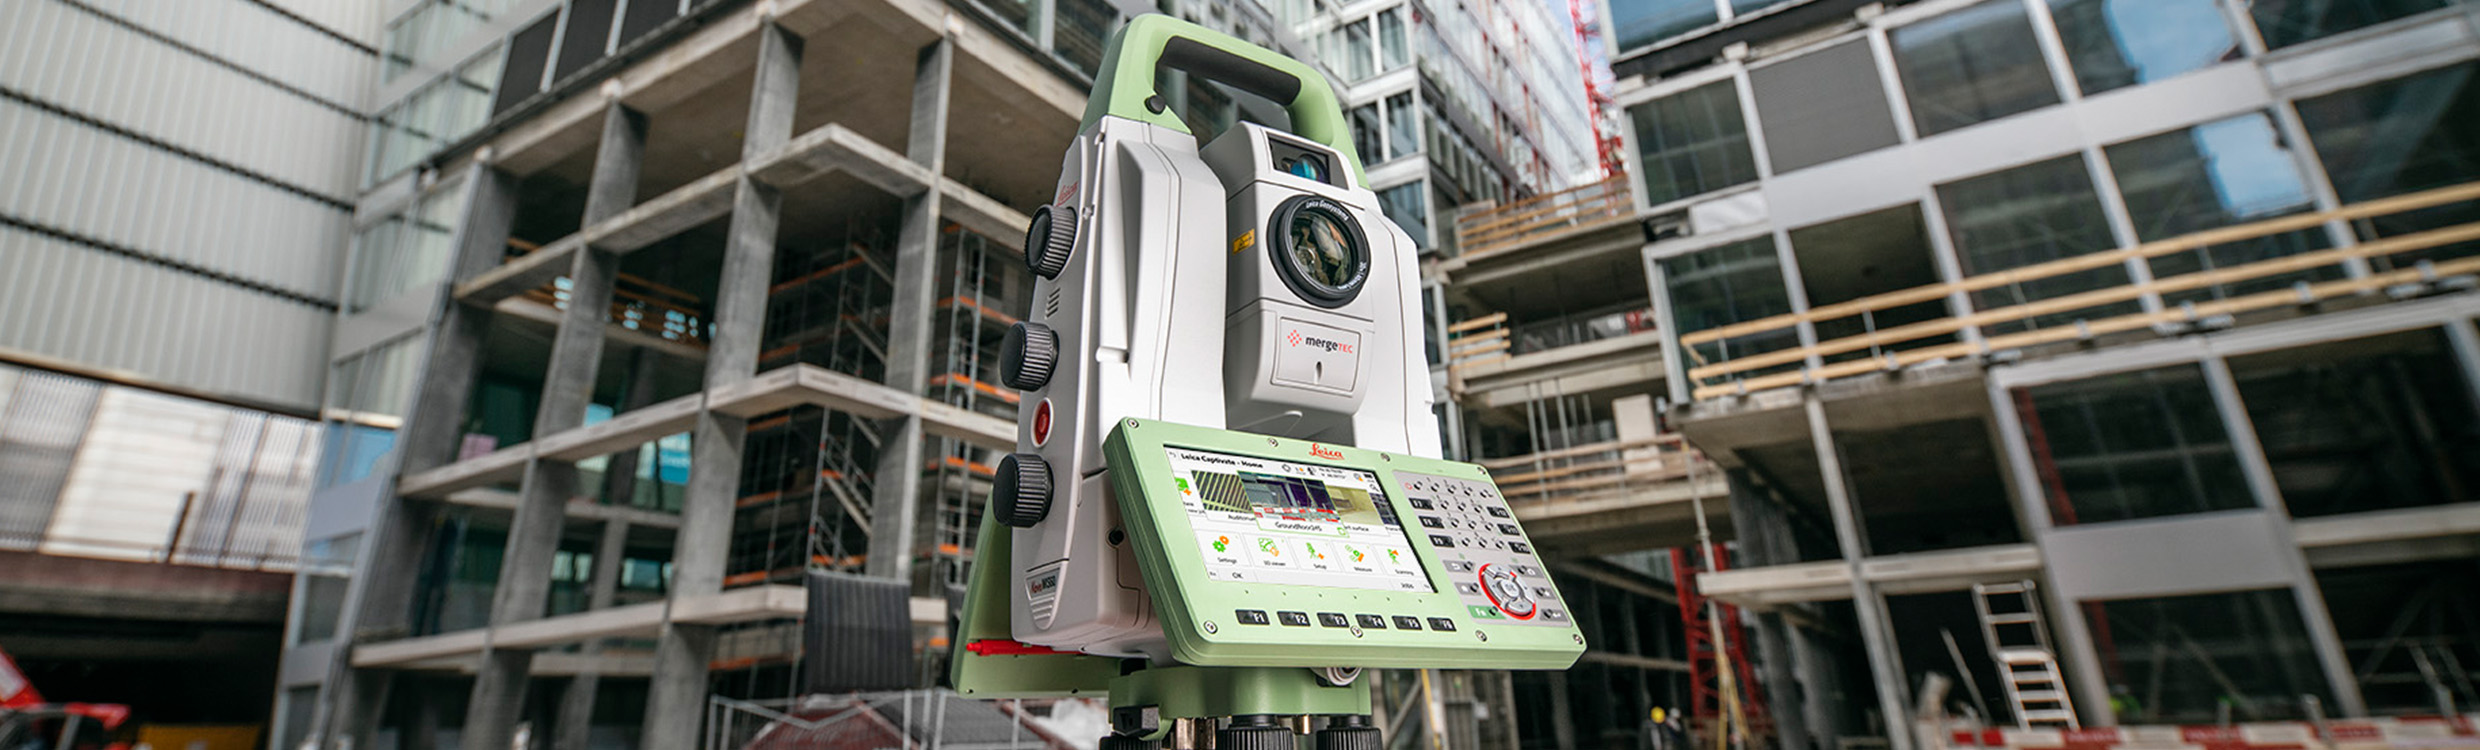 Measurement professionals can now perform all surveying tasks with one instrument - the newest version of Leica Nova MS60 MultiStation